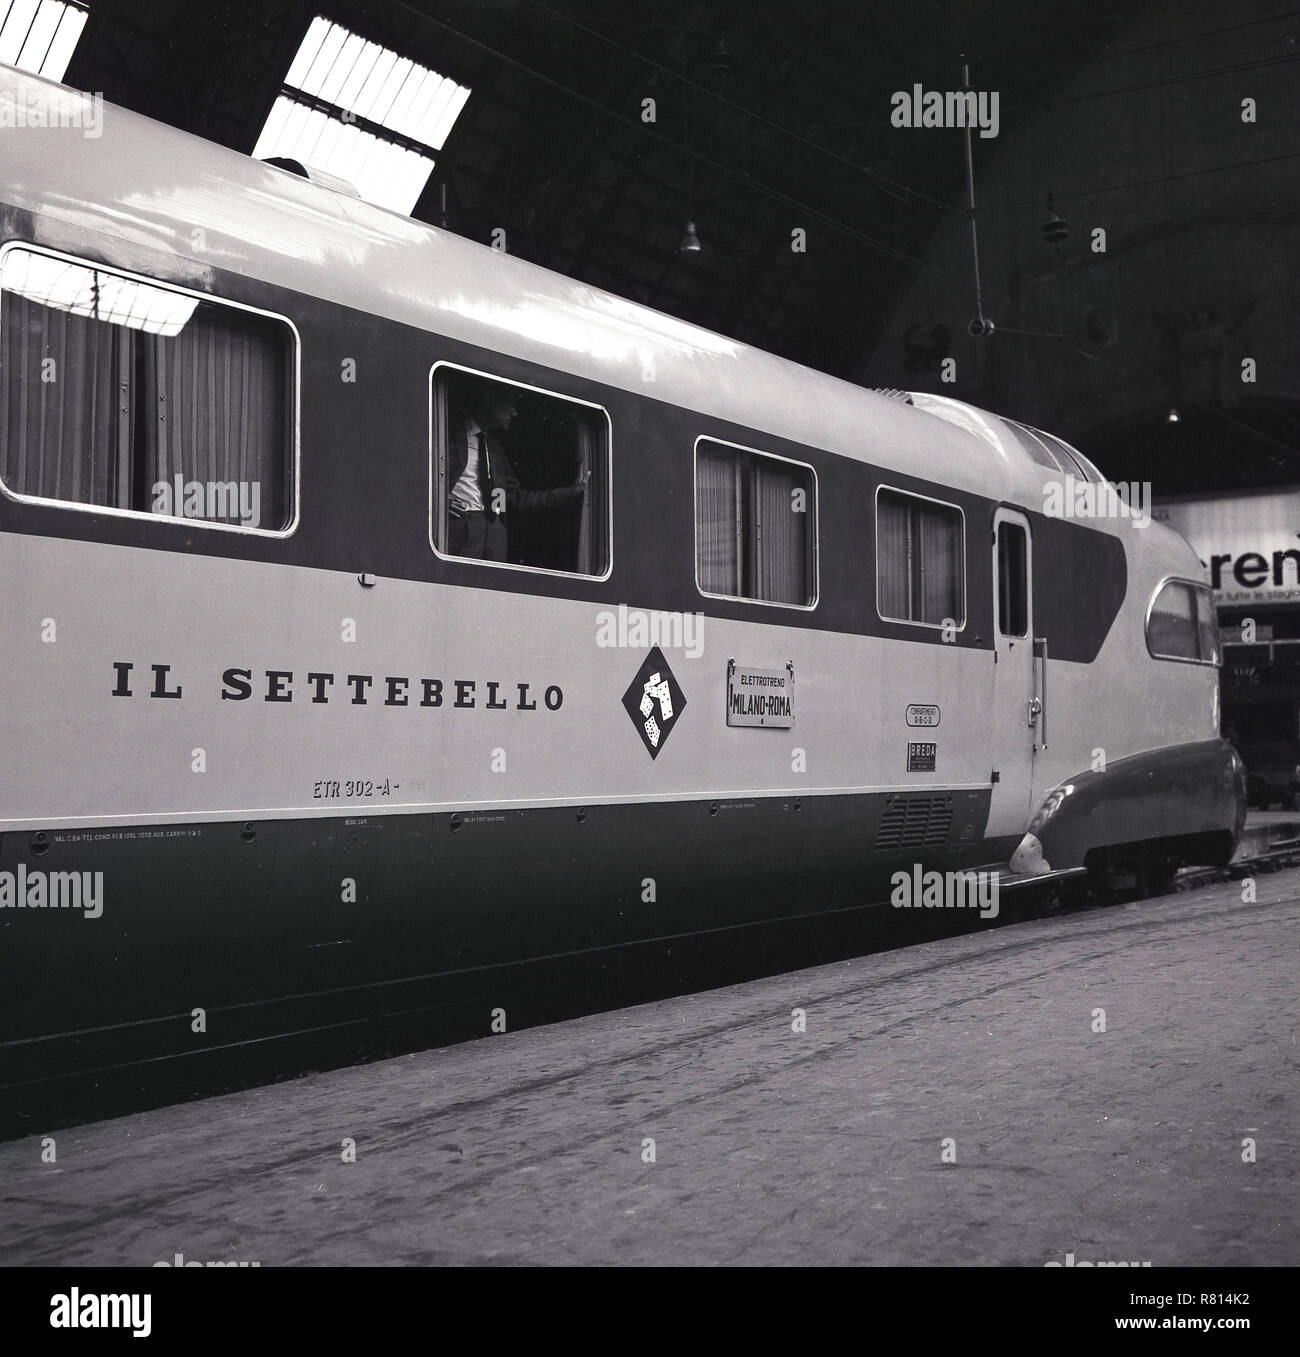 1960, historical, the distinctive Italian train, the'Settebello', on a railway platform at Milan centrale station. Introduced in 1953, this luxury high-speed express train covered the Milano-Roma route and was operated by the Italian State Railways (FS) and featured observation lounges at the front and rear of the the train. Stock Photo